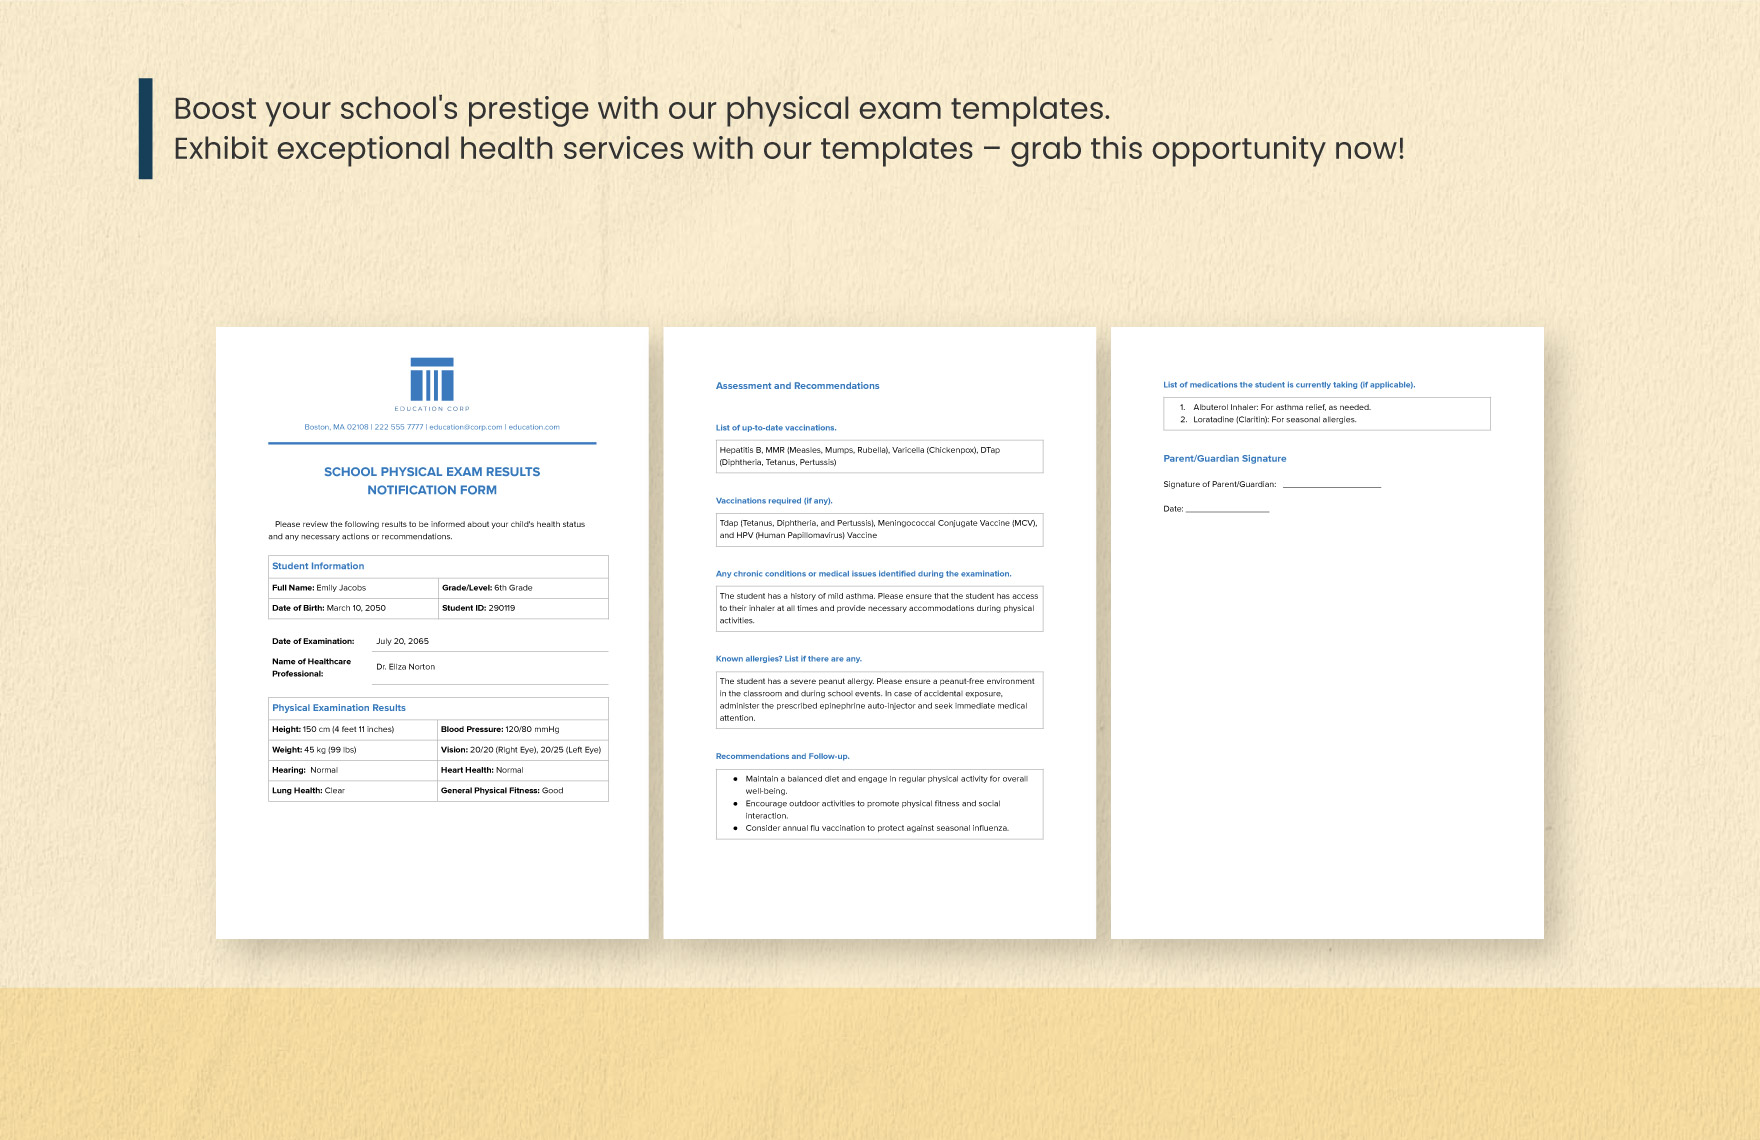 School Physical Exam Results Notification Form Template